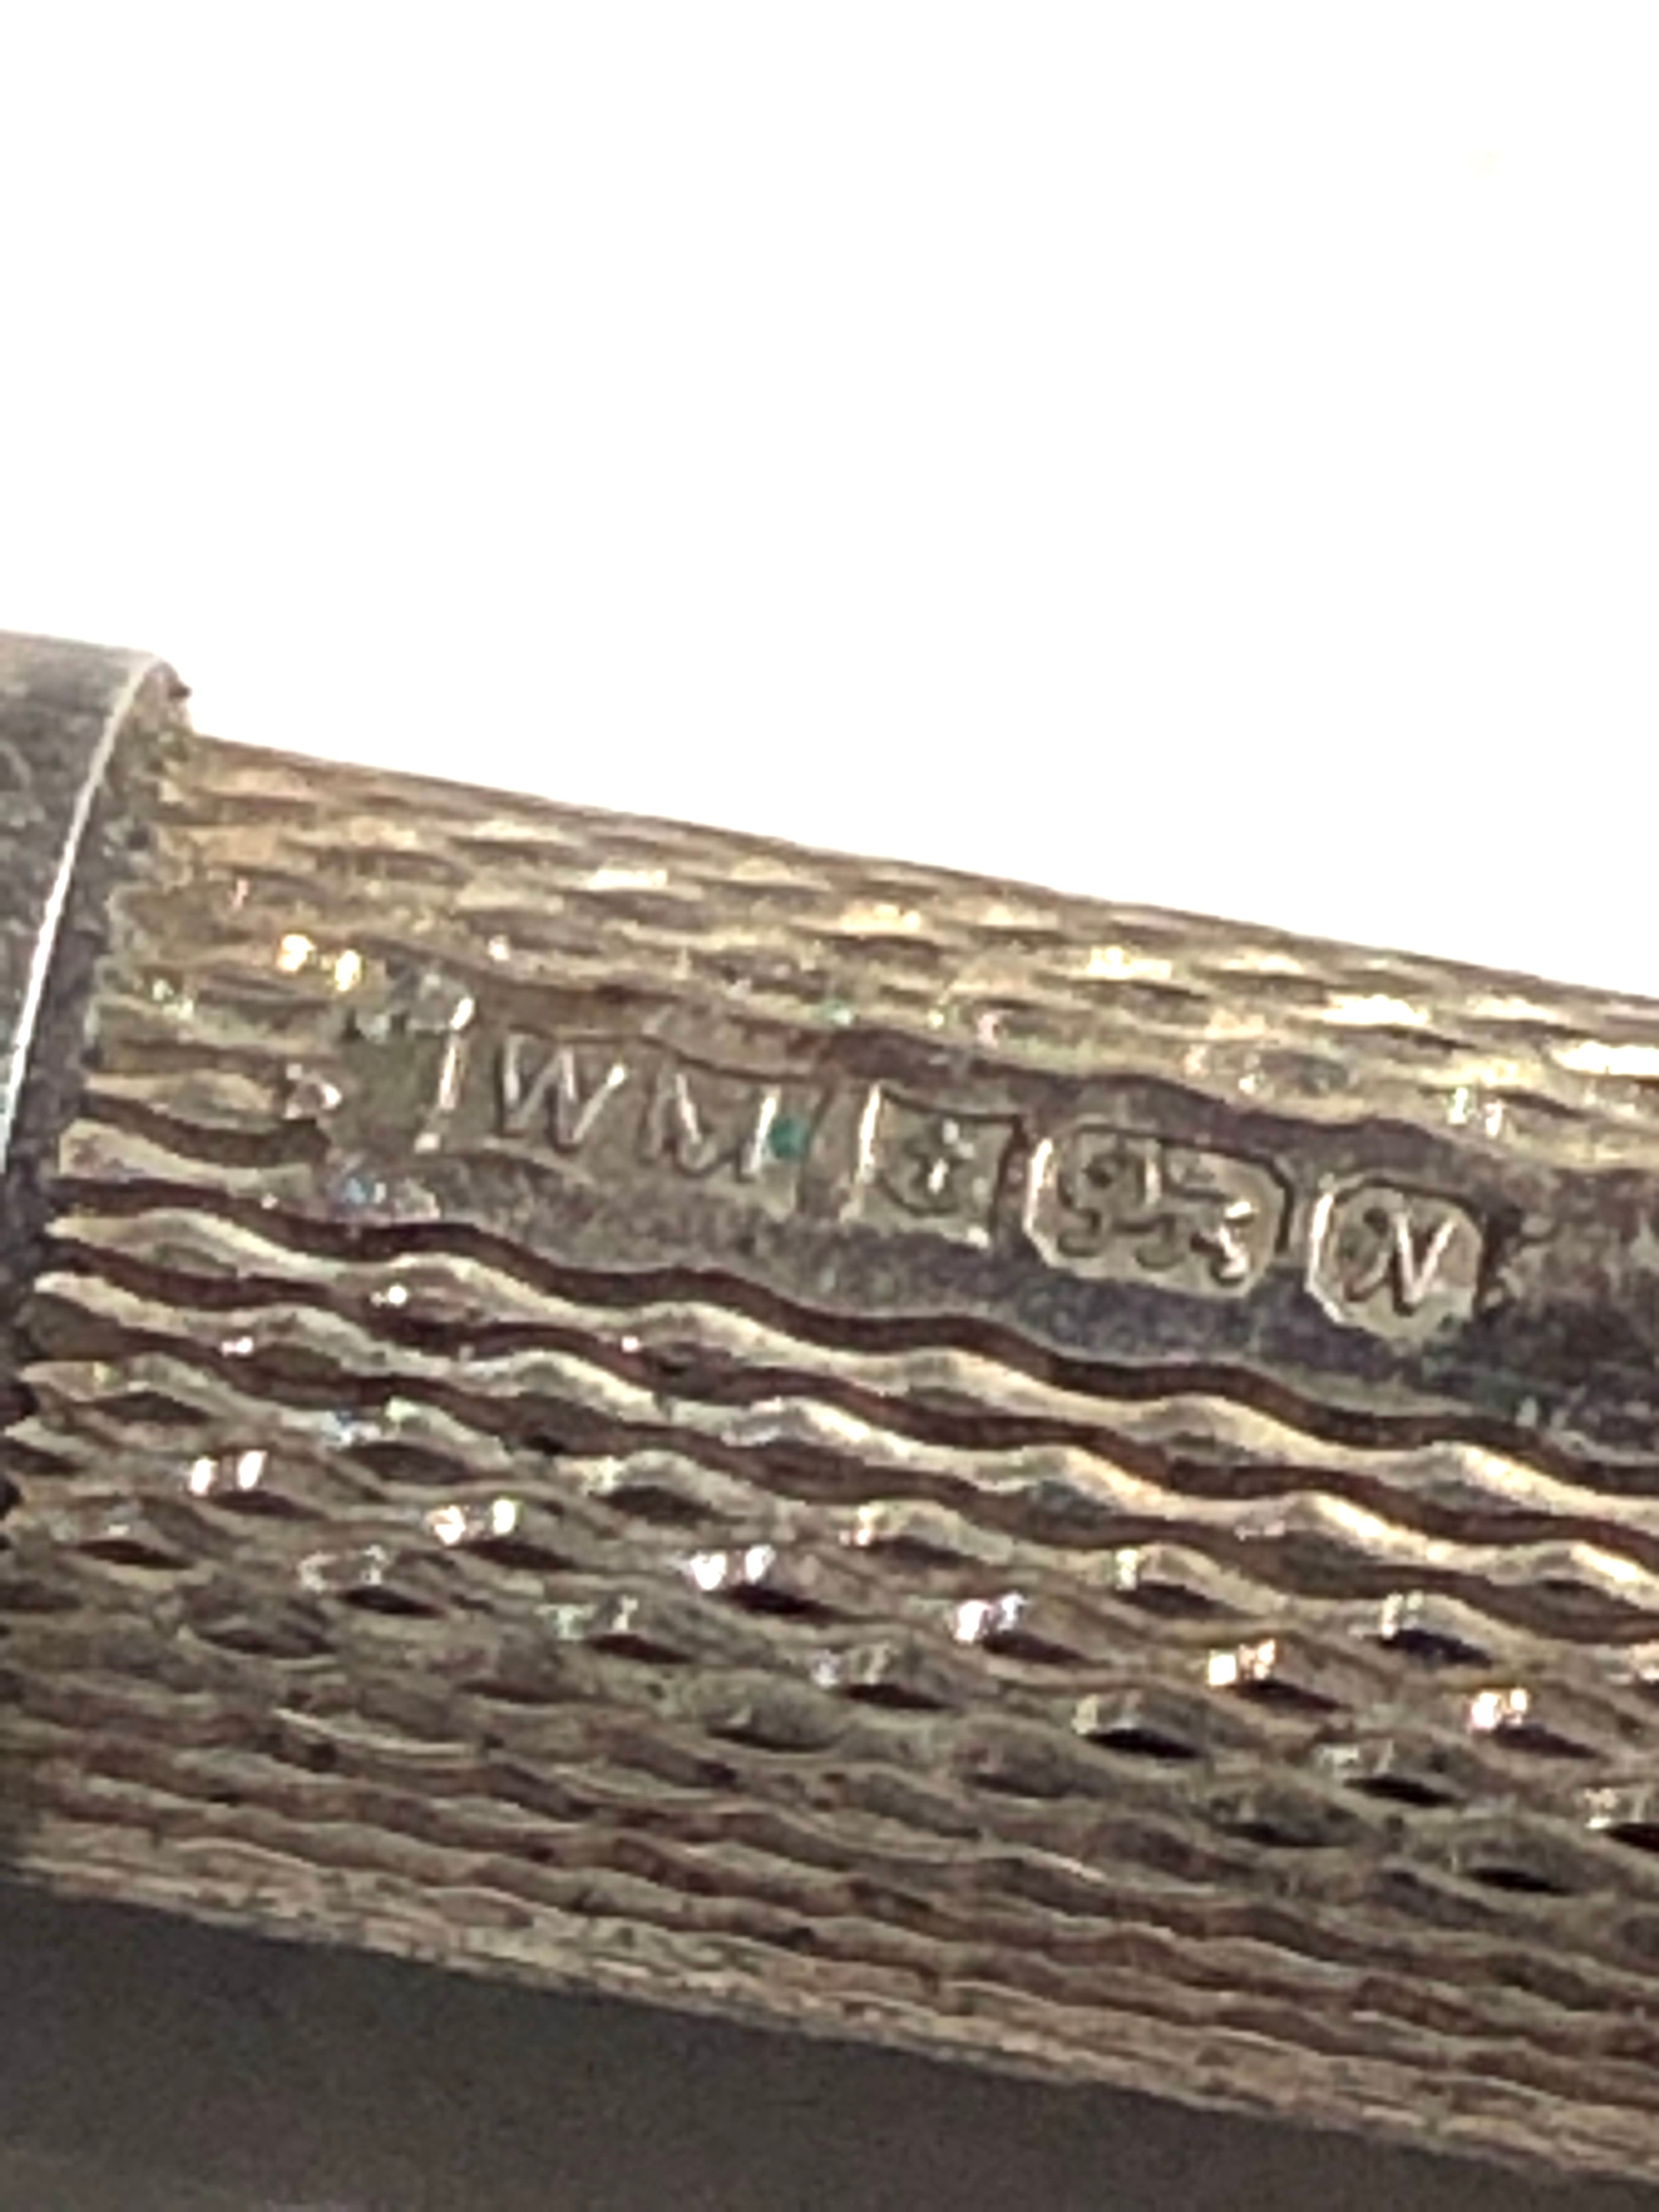 Antique silver toothpick - Image 3 of 4